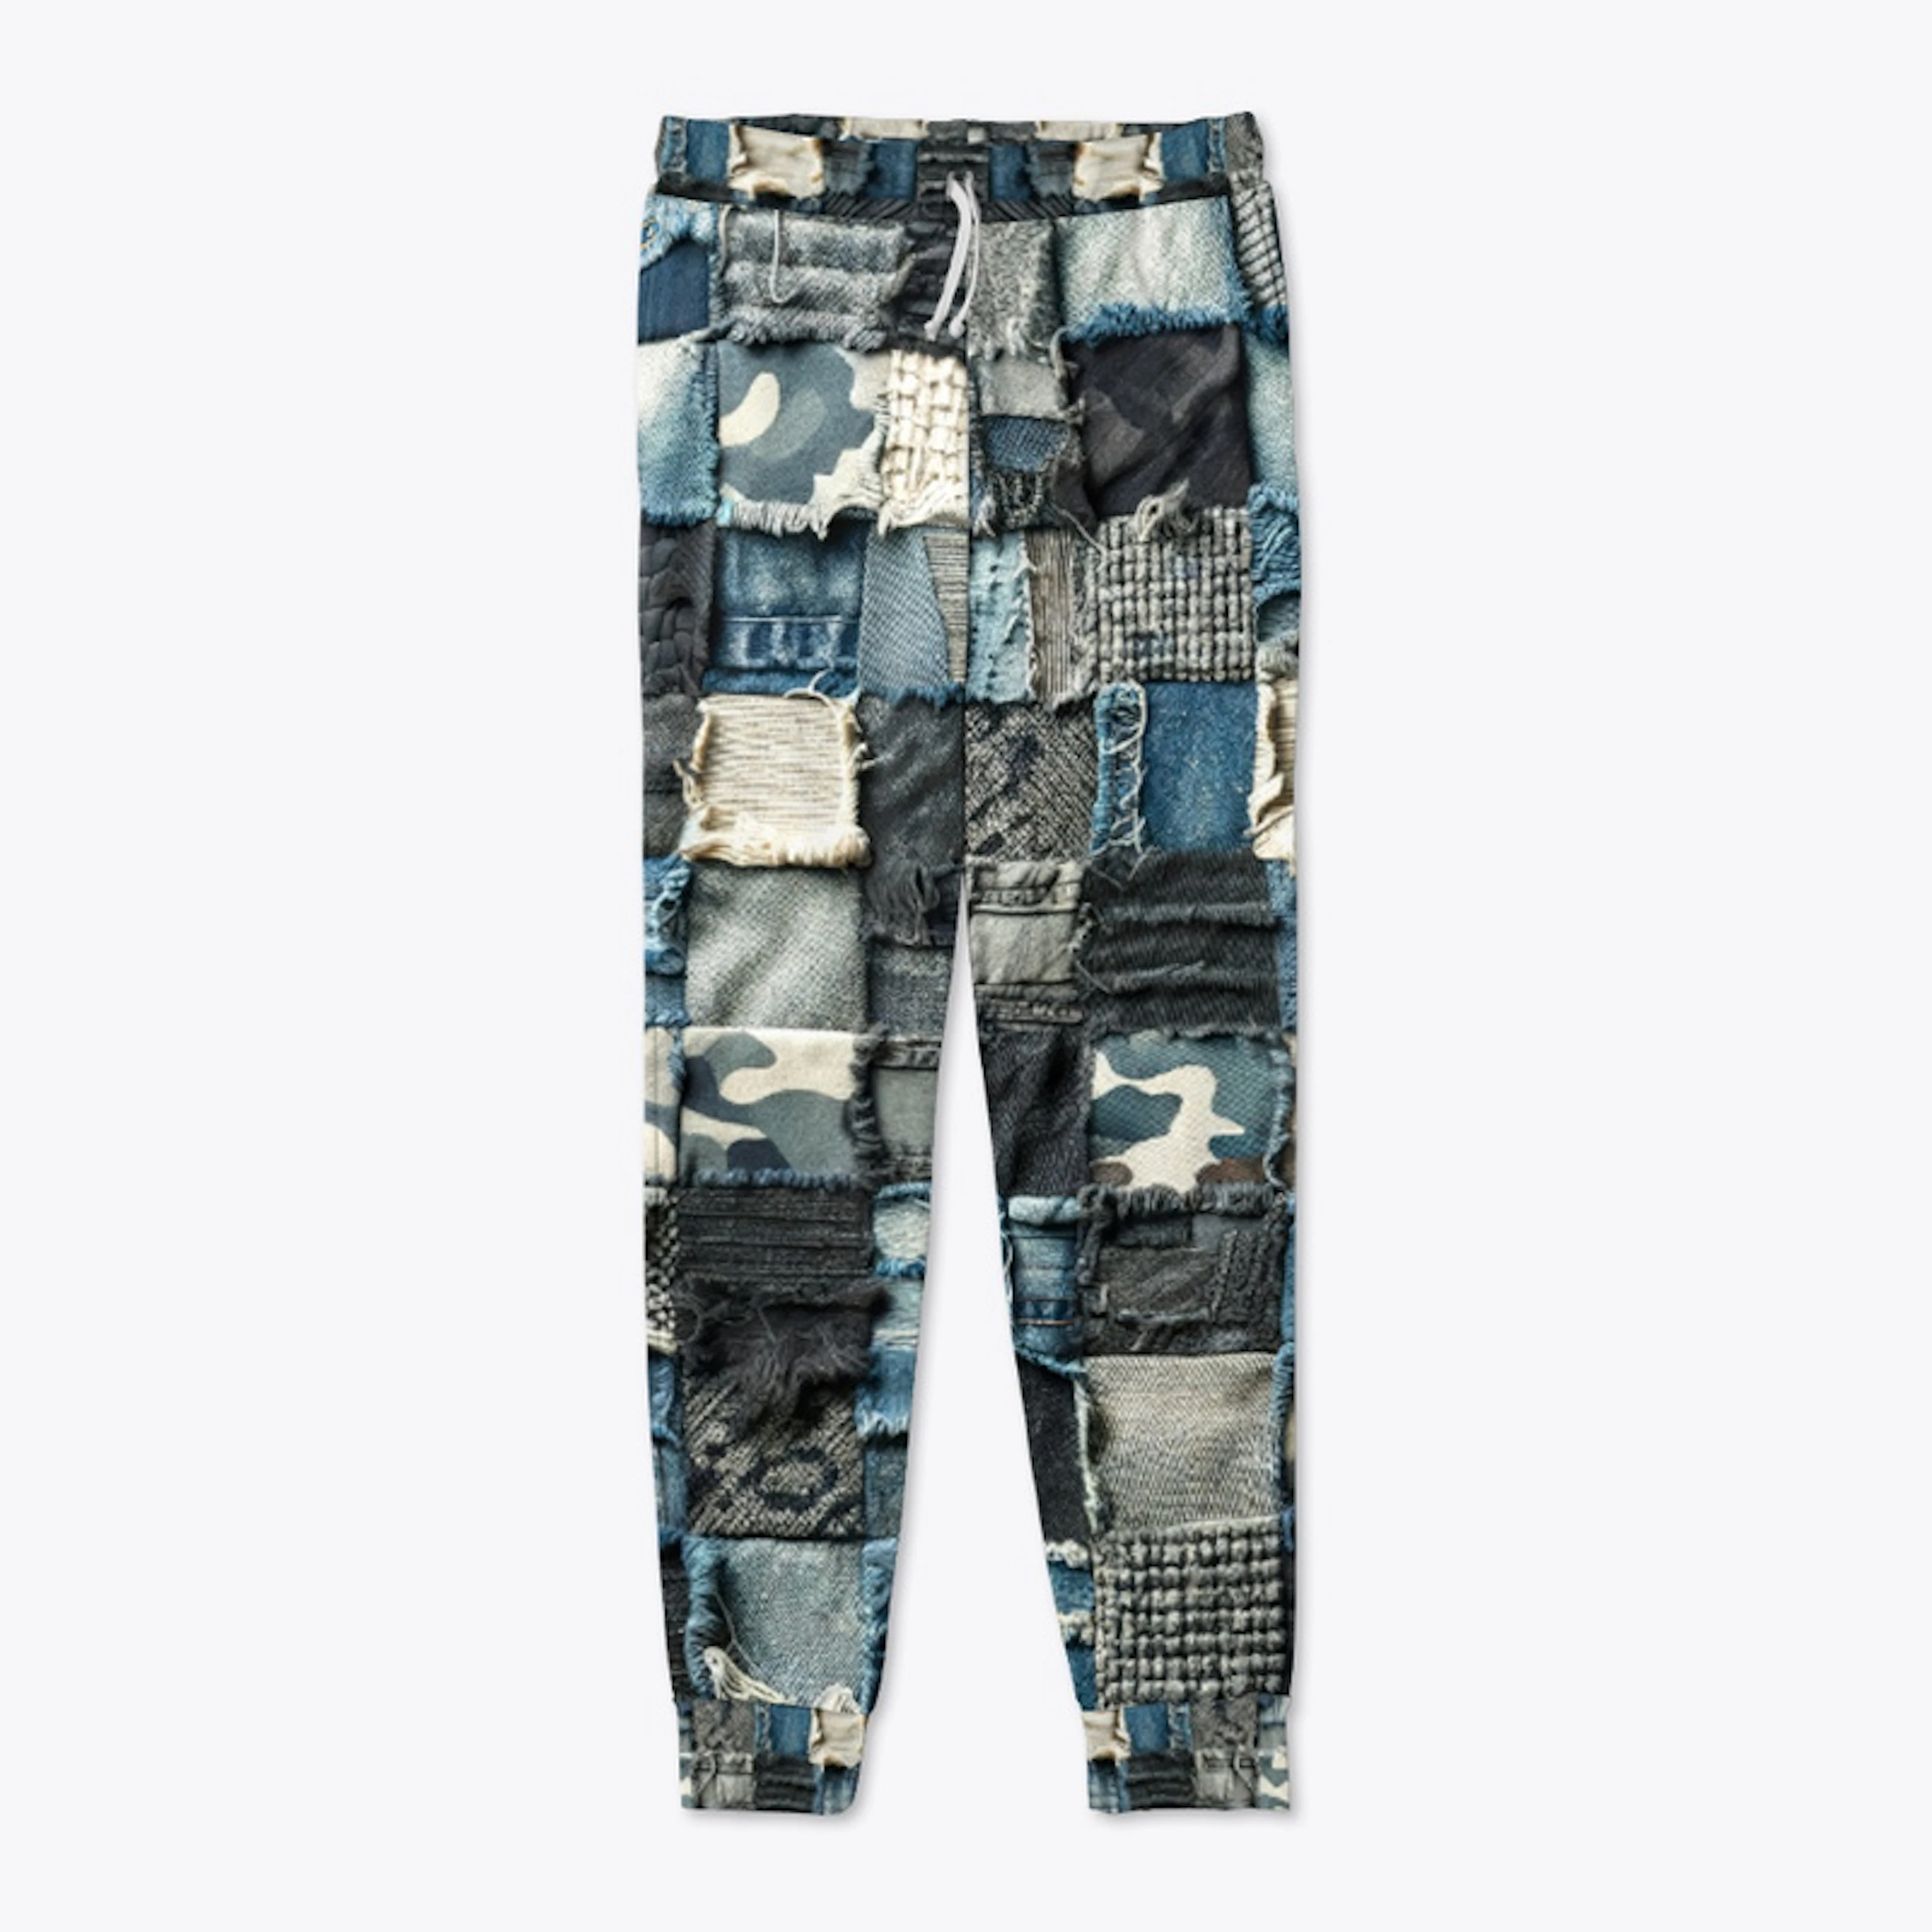 Jeans with camouflage